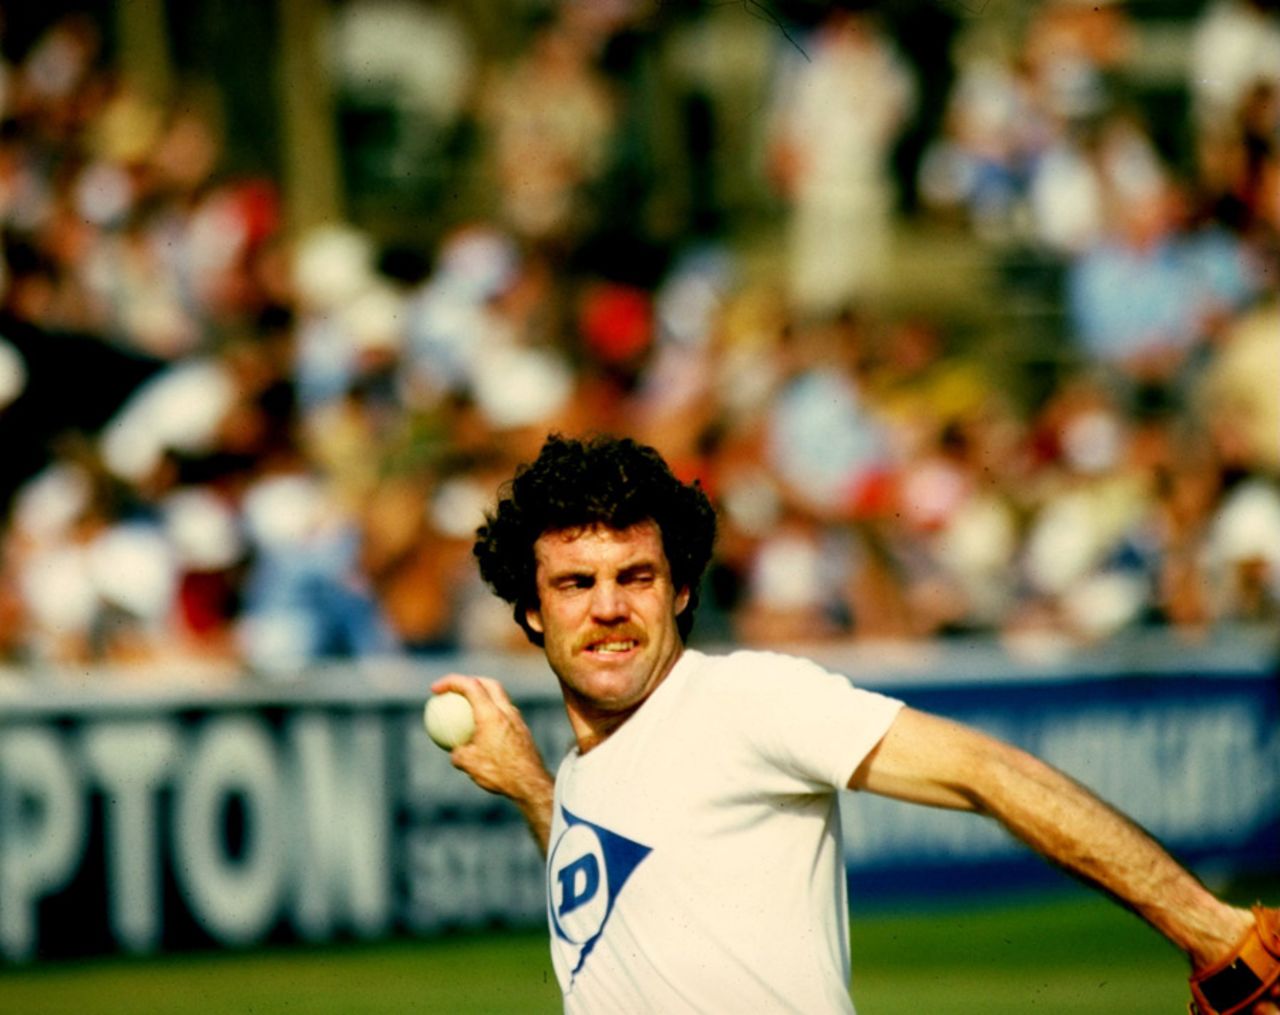 Trevor Chappell of Australia during a training session before the sixth Test, England v Australia, The Oval, August 26, 1981